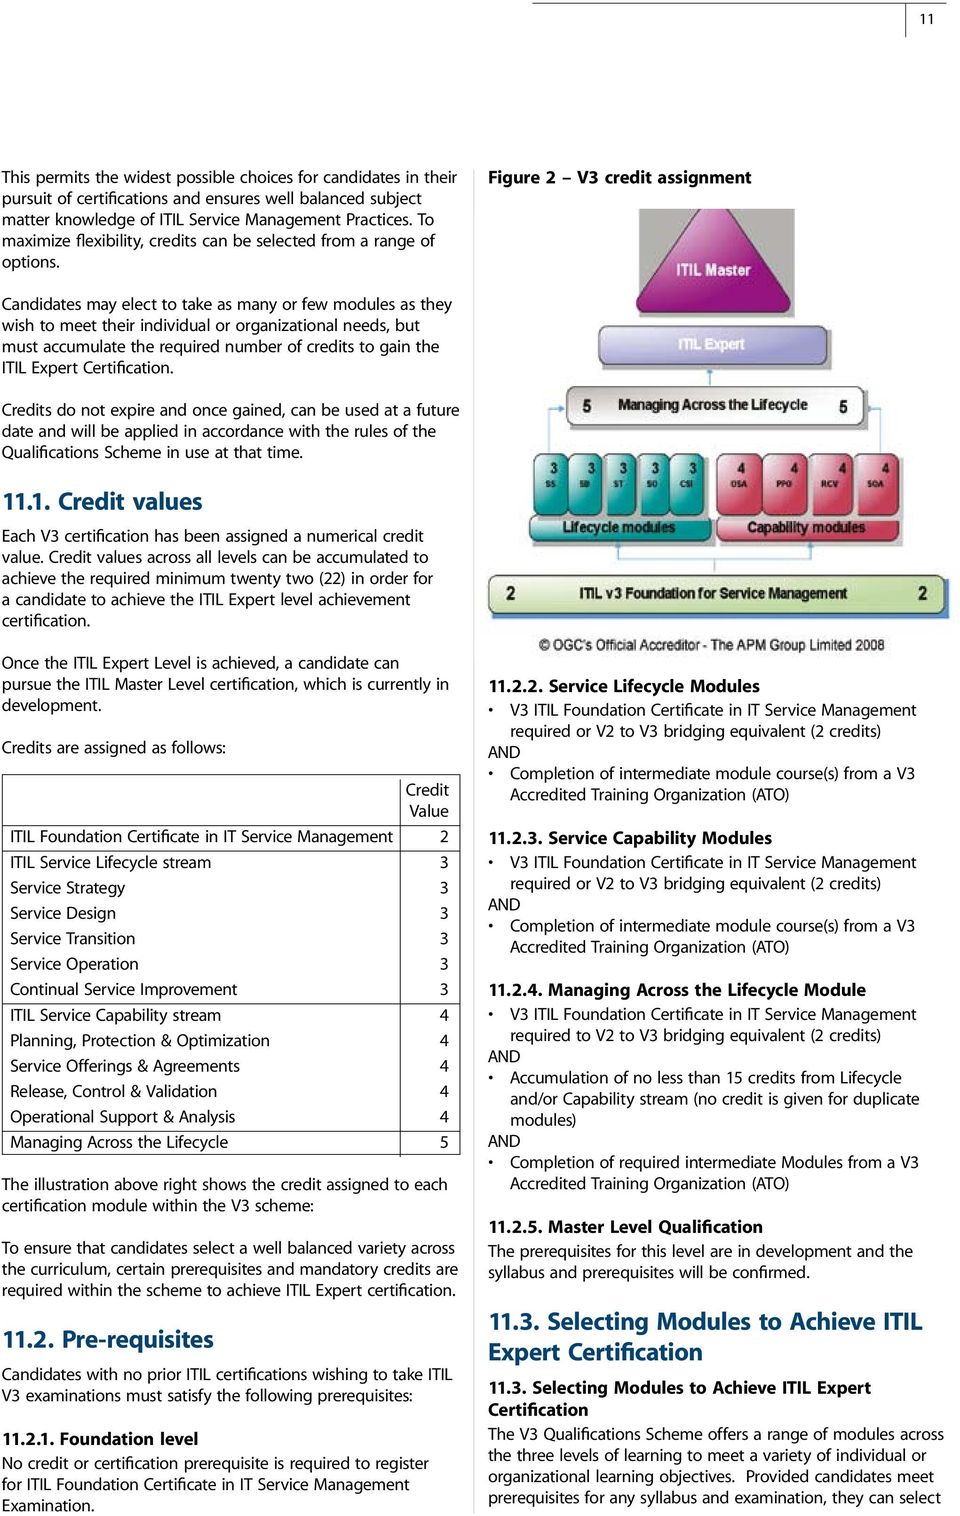 Figure 2 V3 credit assignment Candidates may elect to take as many or few modules as they wish to meet their individual or organizational needs, but must accumulate the required number of credits to